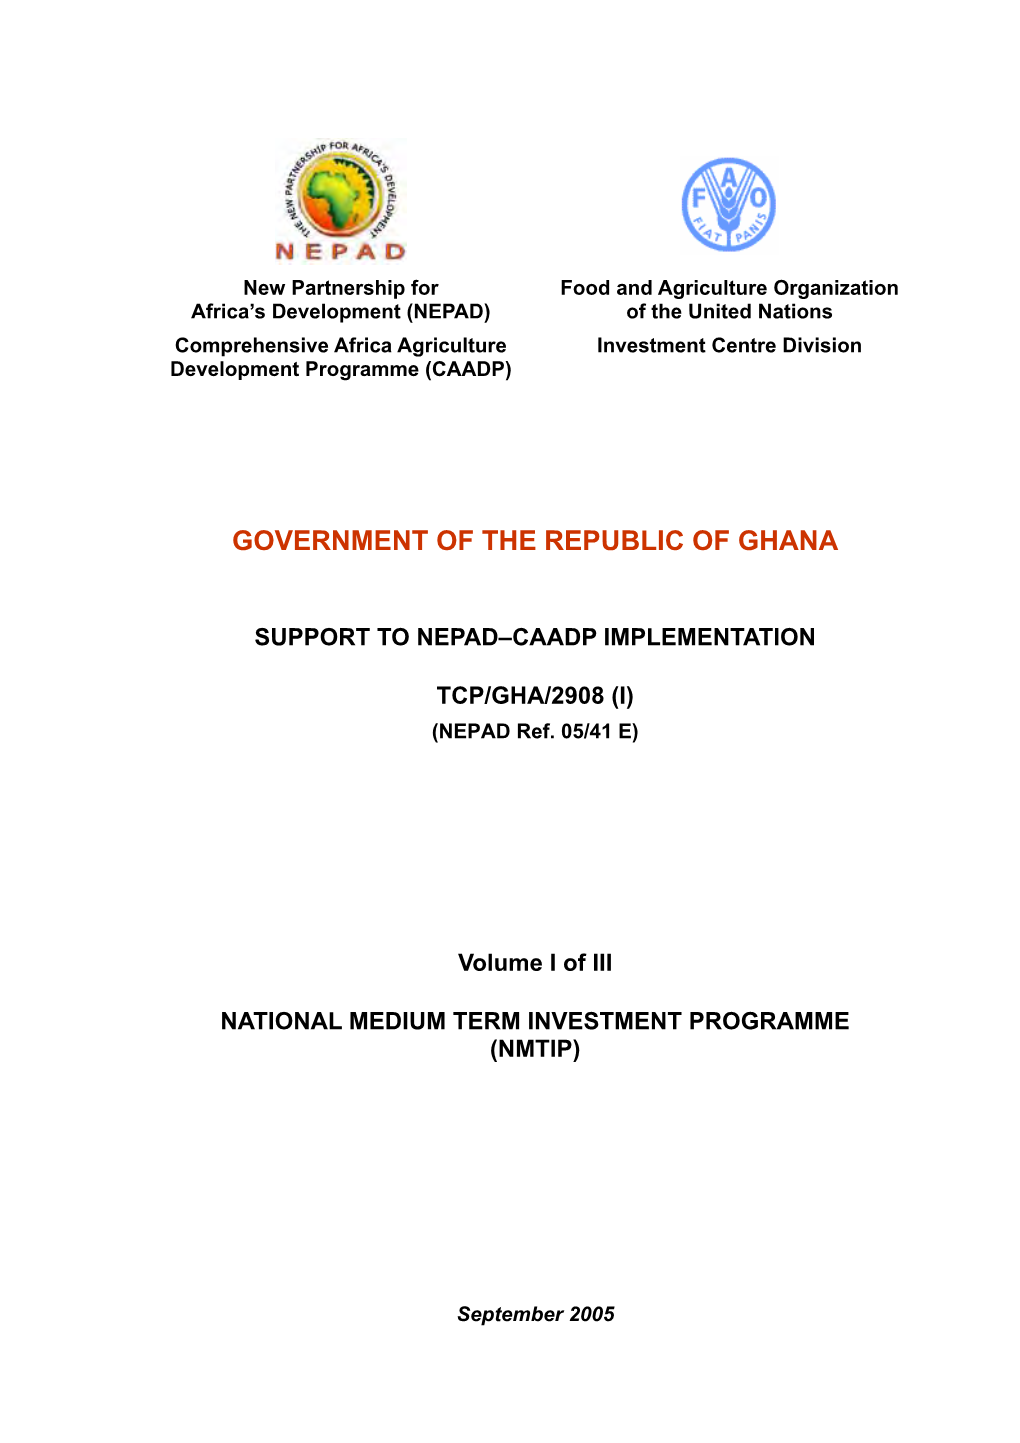 Government of the Republic of Ghana